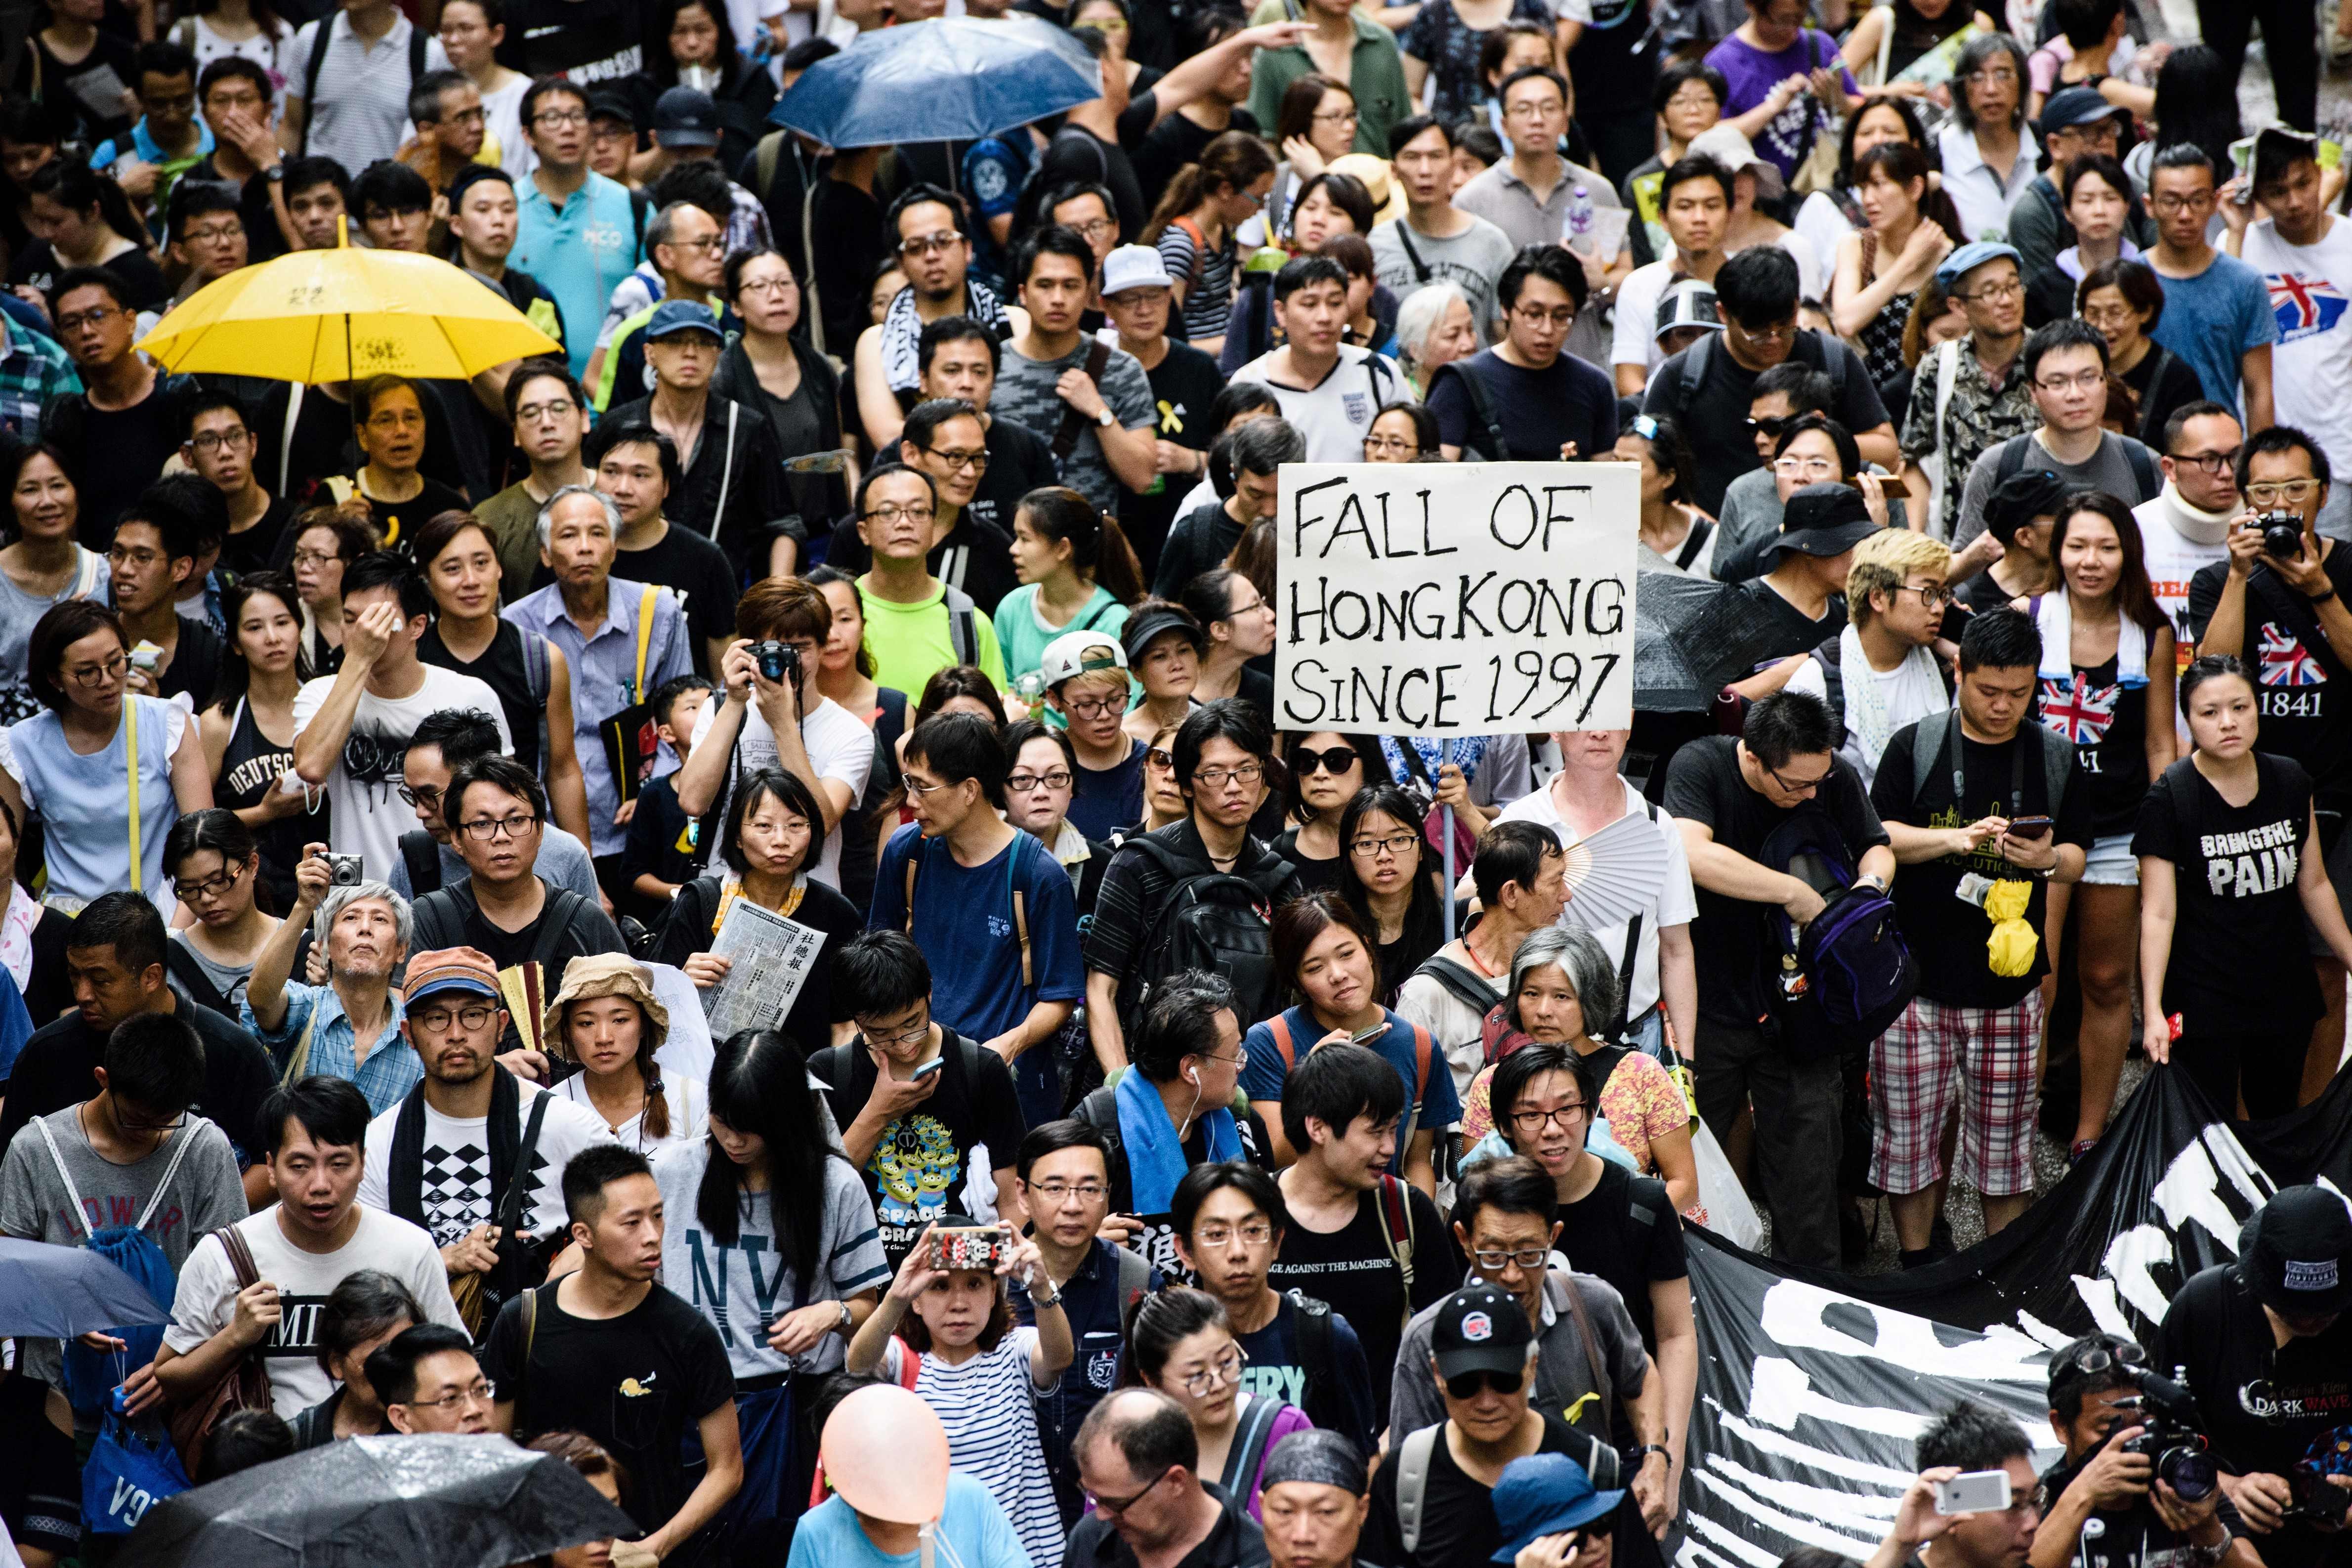 Protesters march in Hong Kong on July 1 this year, the 20th anniversary of the city's handover from British to Chinese rule. Photo: AFP